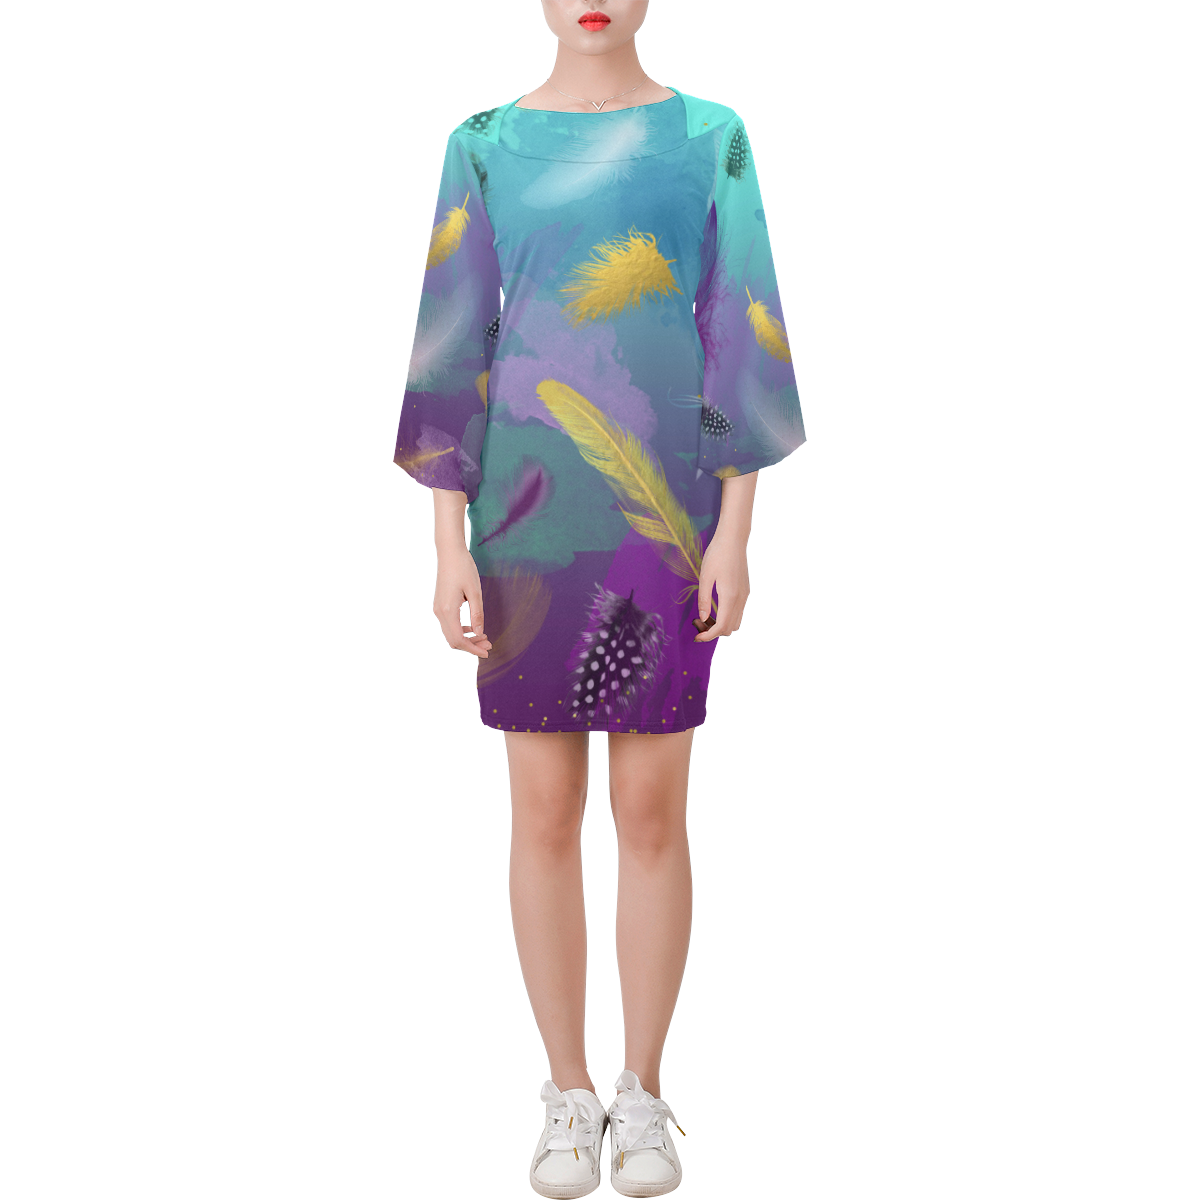 Dancing Feathers - Turquoise and Purple Bell Sleeve Dress (Model D52)